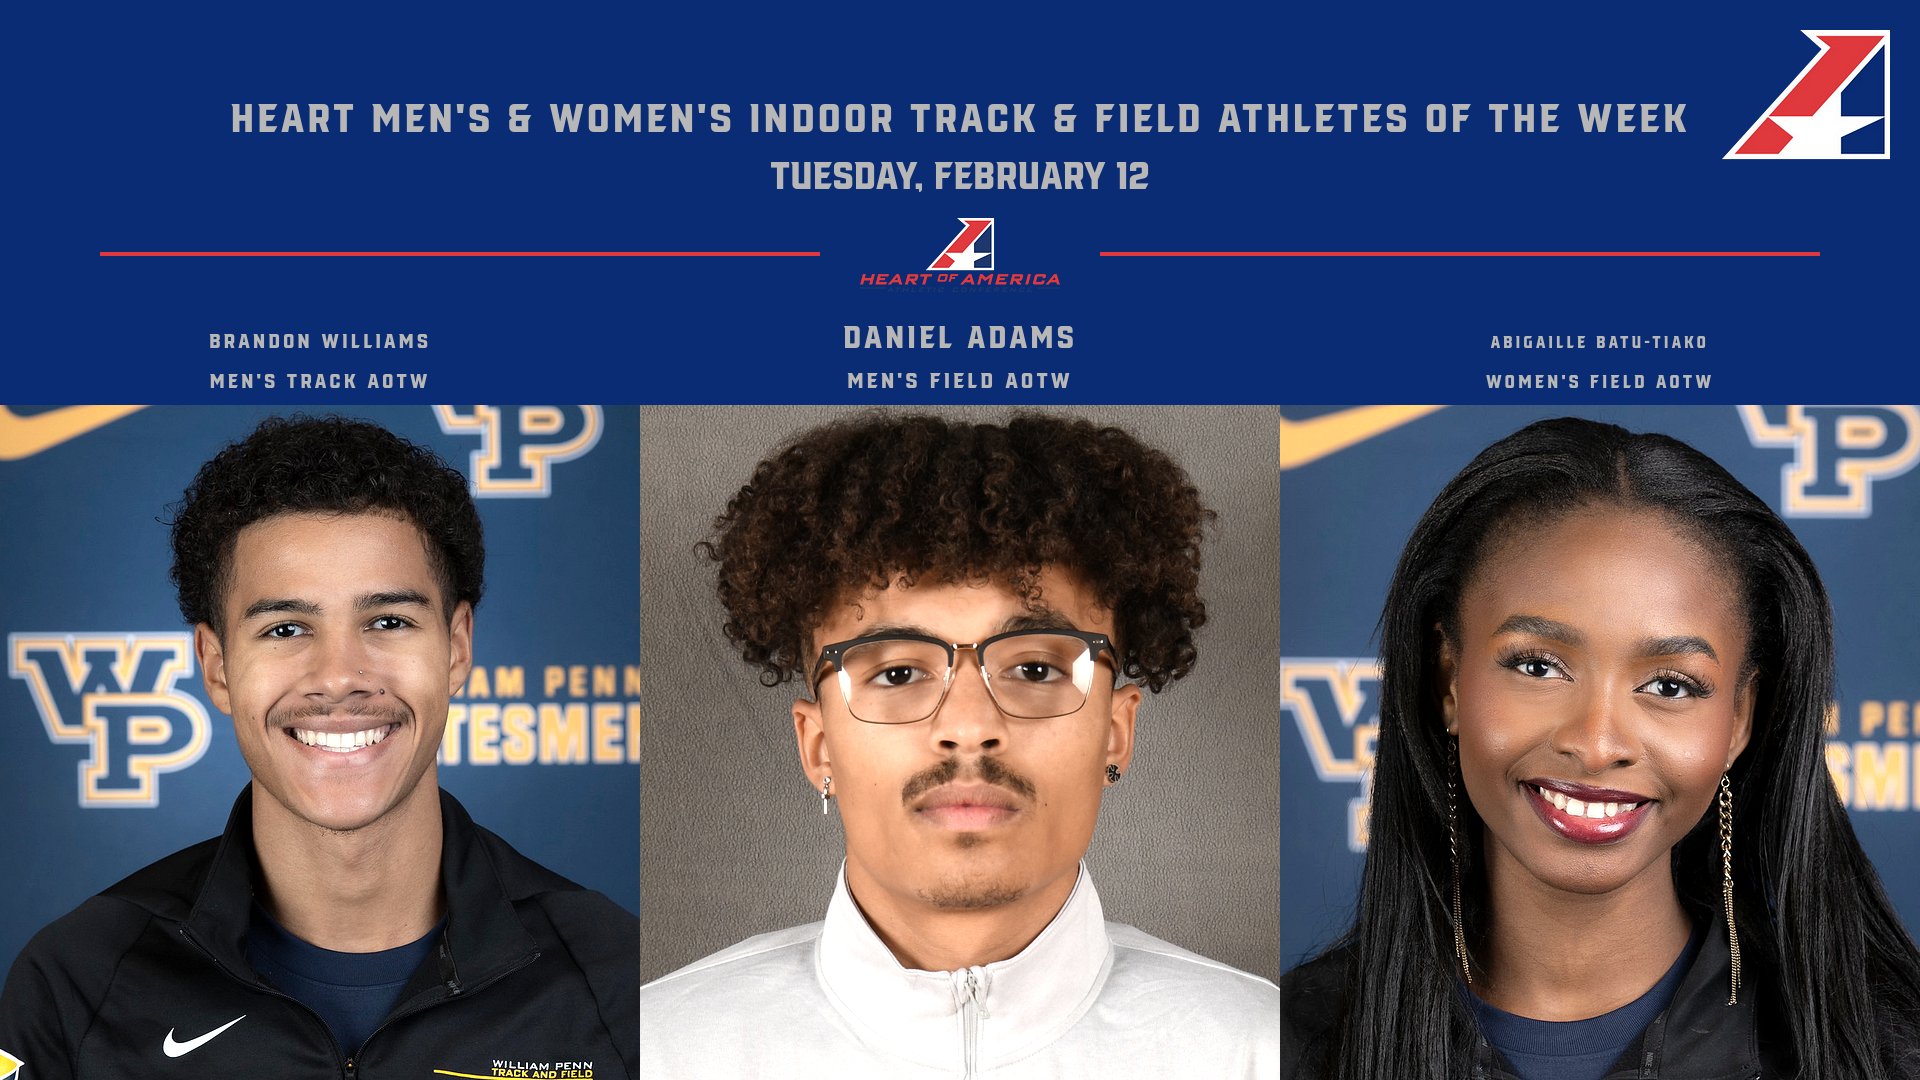 Heart Men’s and Women’s Indoor Track & Field Athletes of the Week Announced – February 12